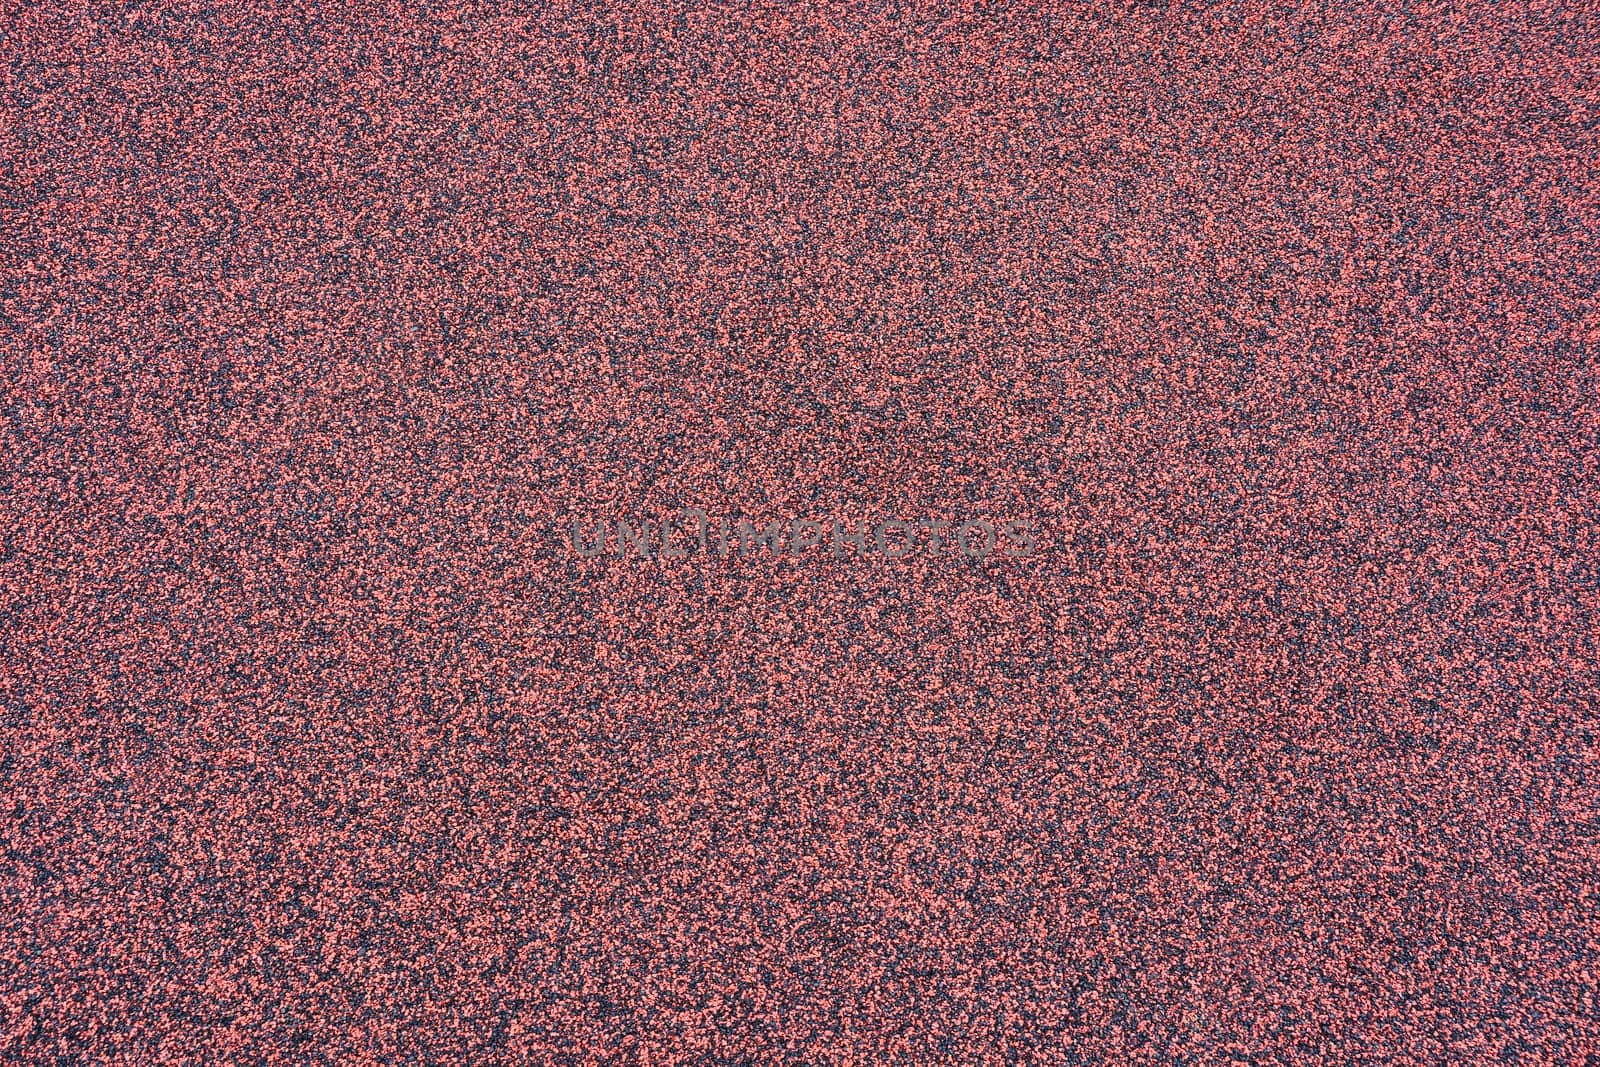 Running track rubber surface texture from a sport's stadium. Floor eco surface manufactured from recycled tires